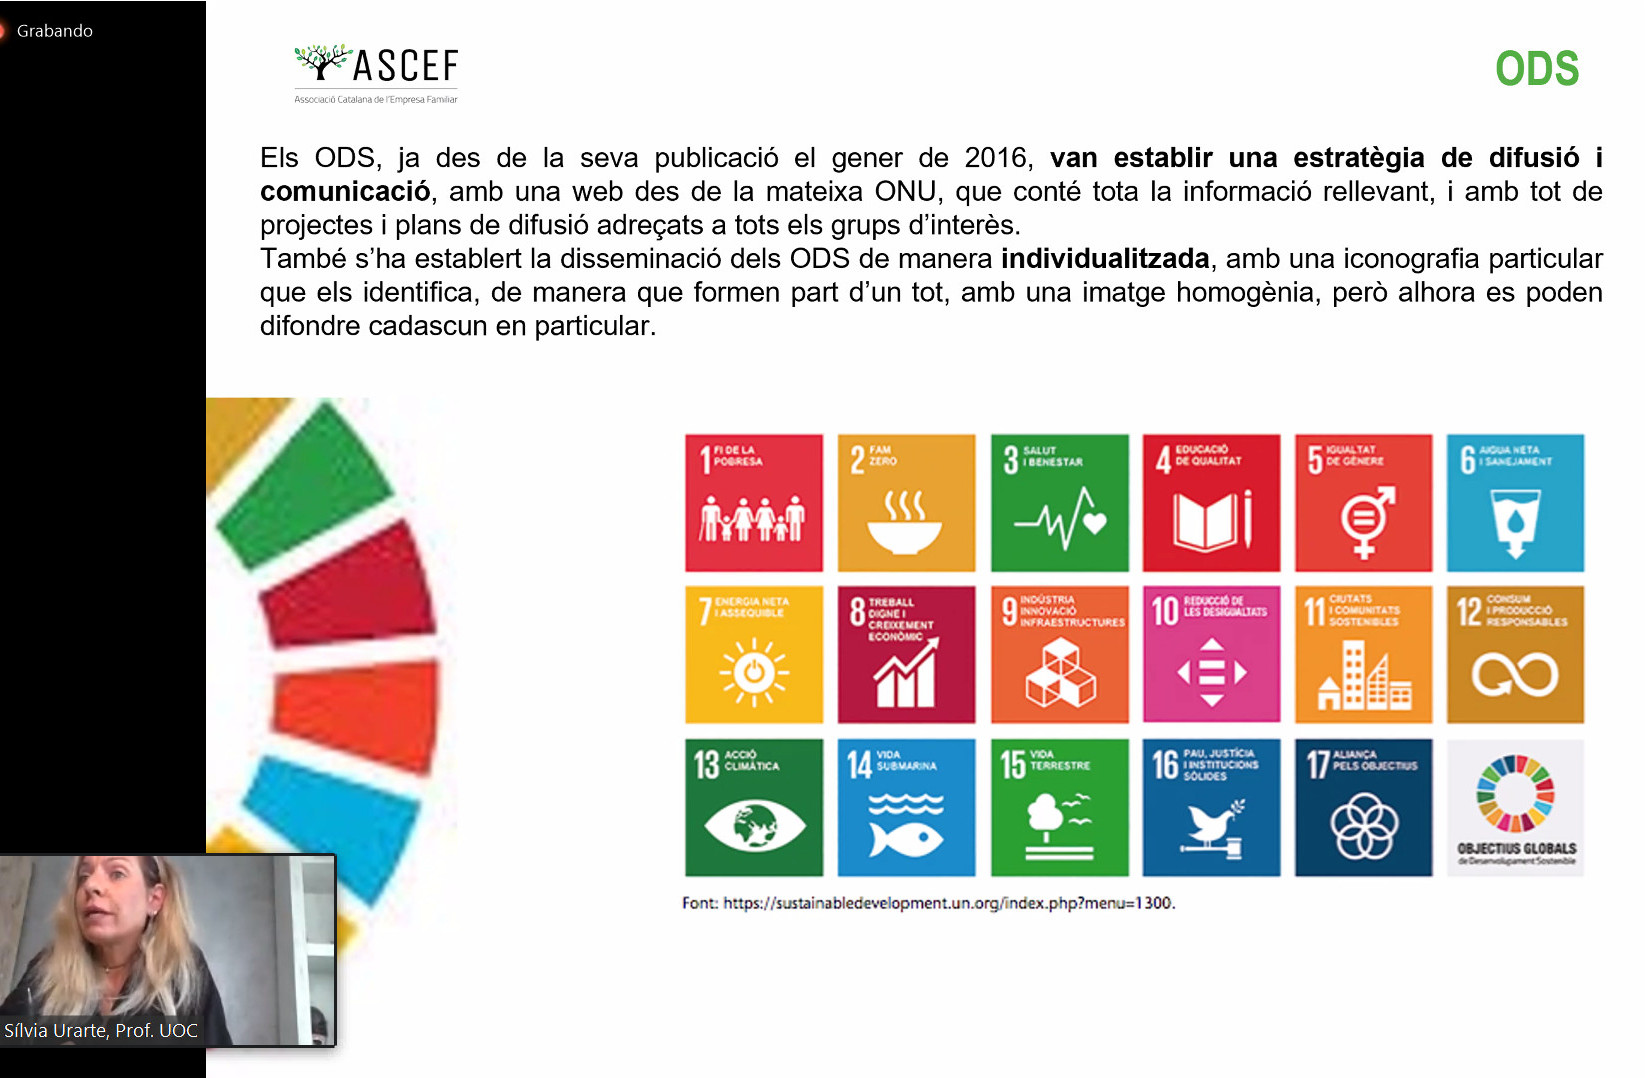 “SDGs are not a matter of social responsibility, but a sustainability obligation”